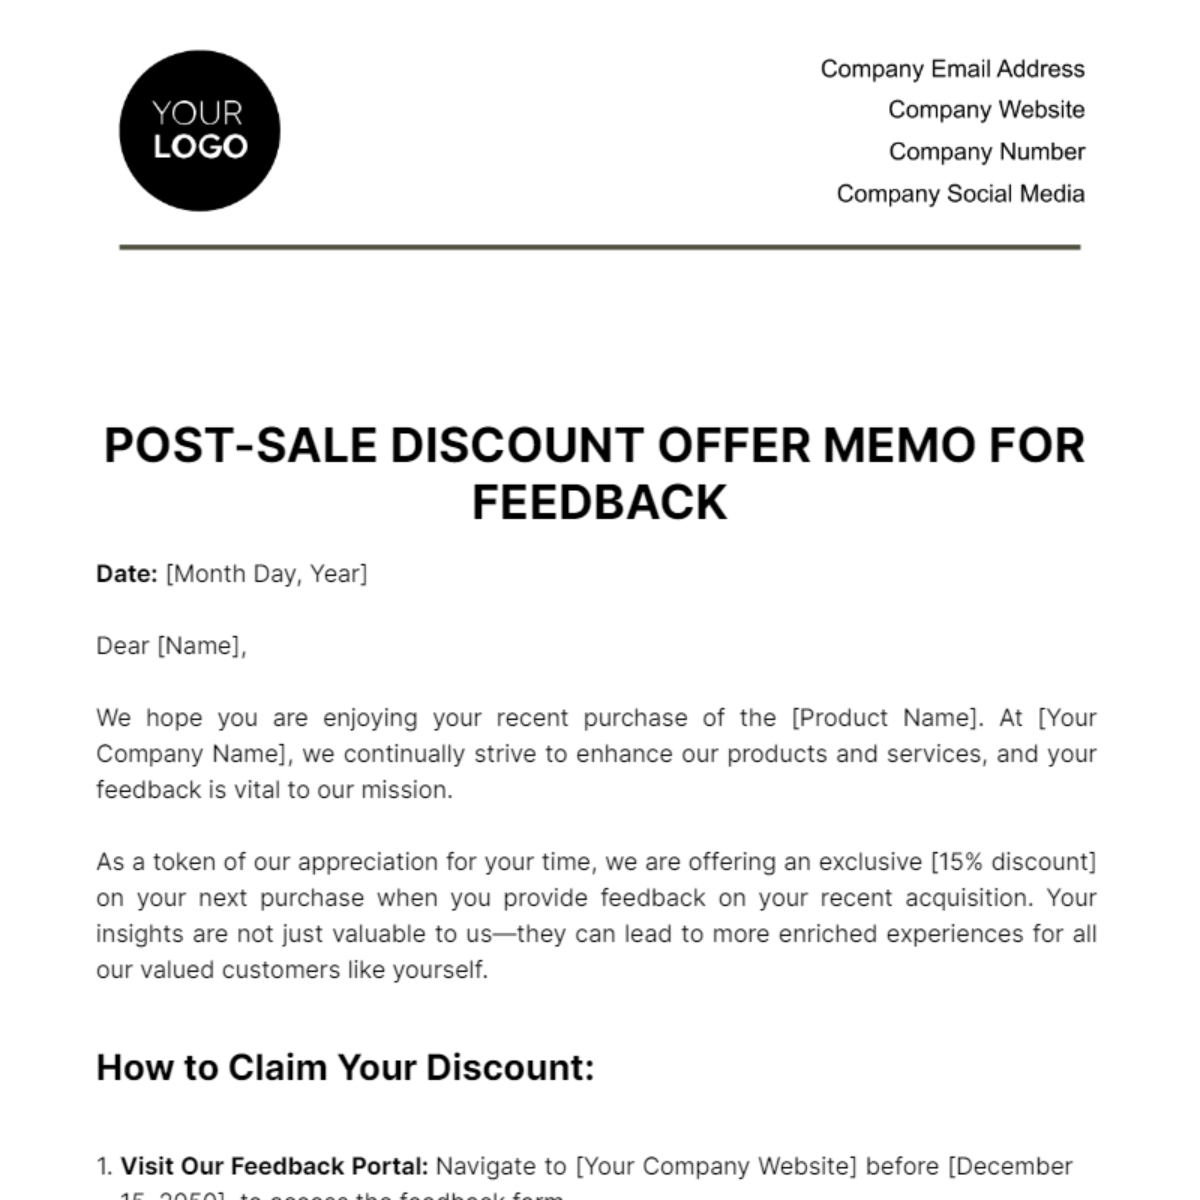 Post-Sale Discount Offer Memo for Feedback Template